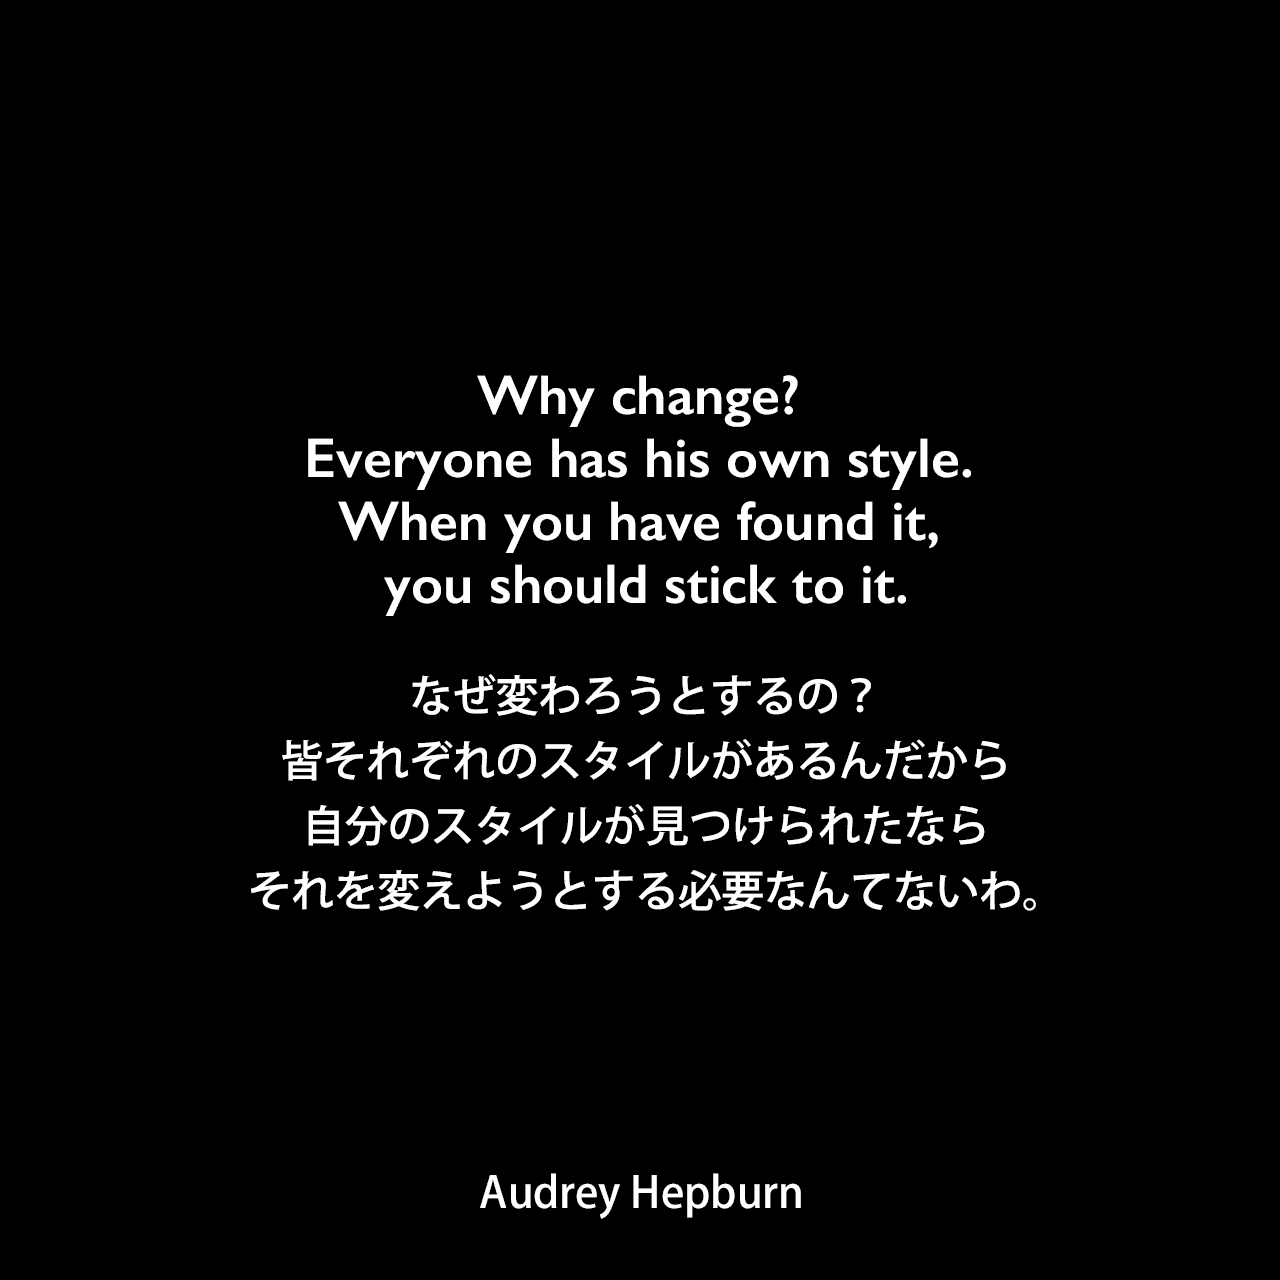 Why change? Everyone has his own style. When you have found it, you should stick to it.なぜ変わろうとするの？皆それぞれのスタイルがあるんだから、自分のスタイルが見つけられたなら、それを変えようとする必要なんてないわ。Audrey Hepburn